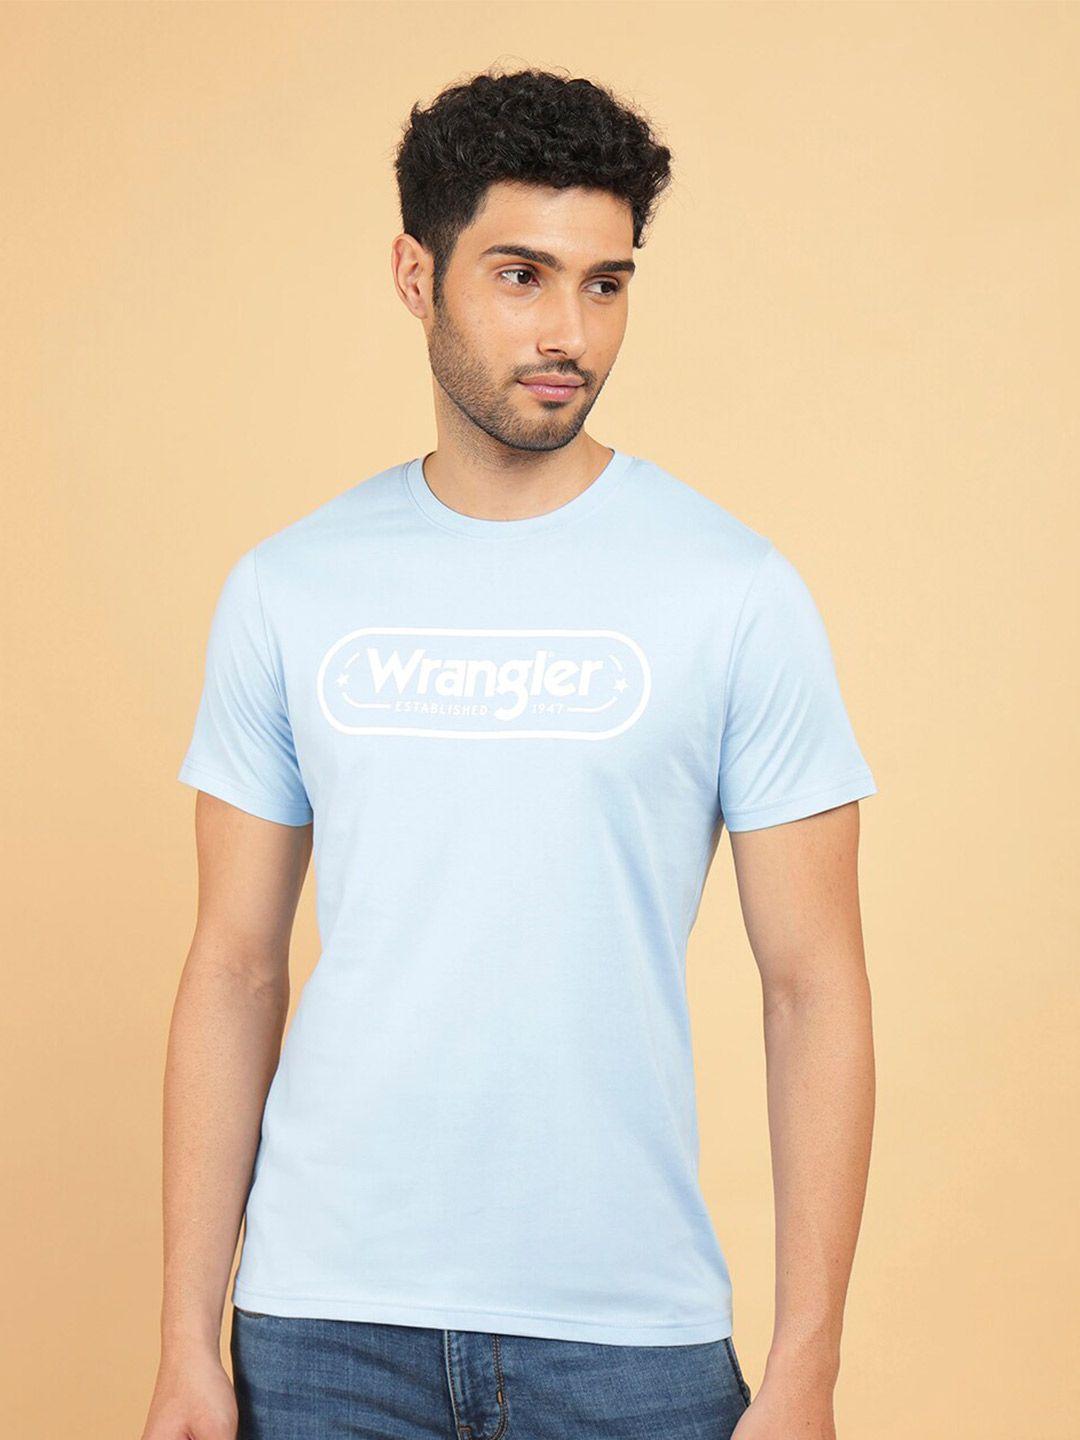 Wrangler Typography Printed Pure Cotton T-shirt